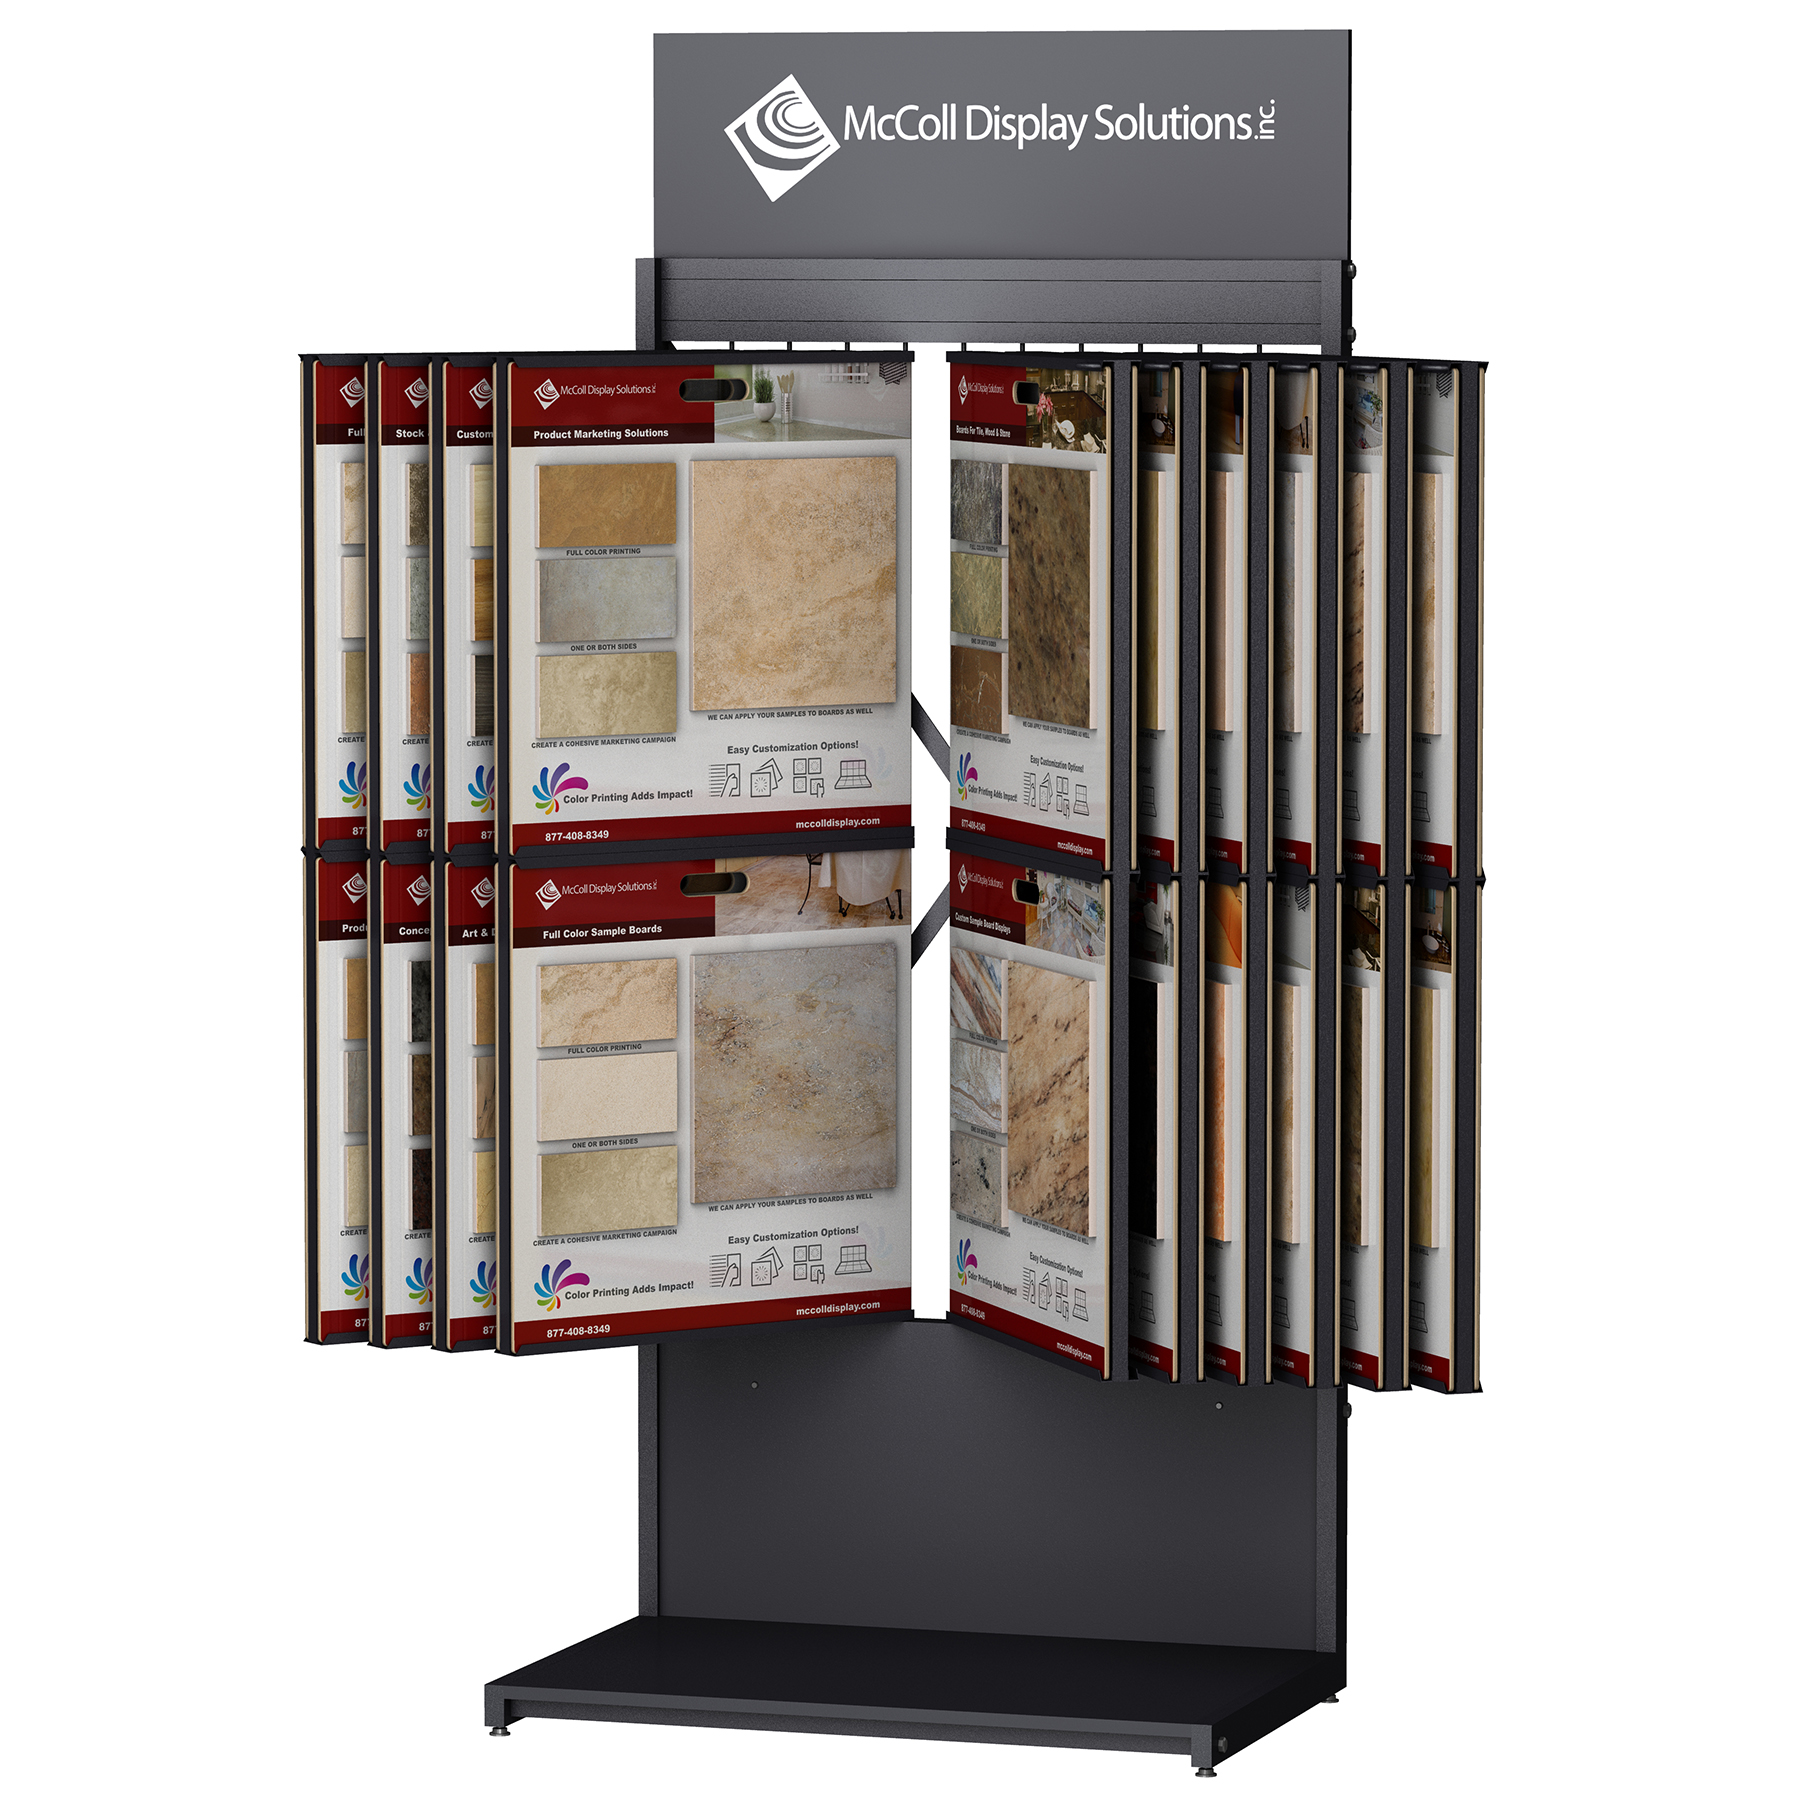 CD09 Wing Rack Tower for Sample Boards or Tile Stone Marble Wood is an Easy to Use Channel System Showroom Display